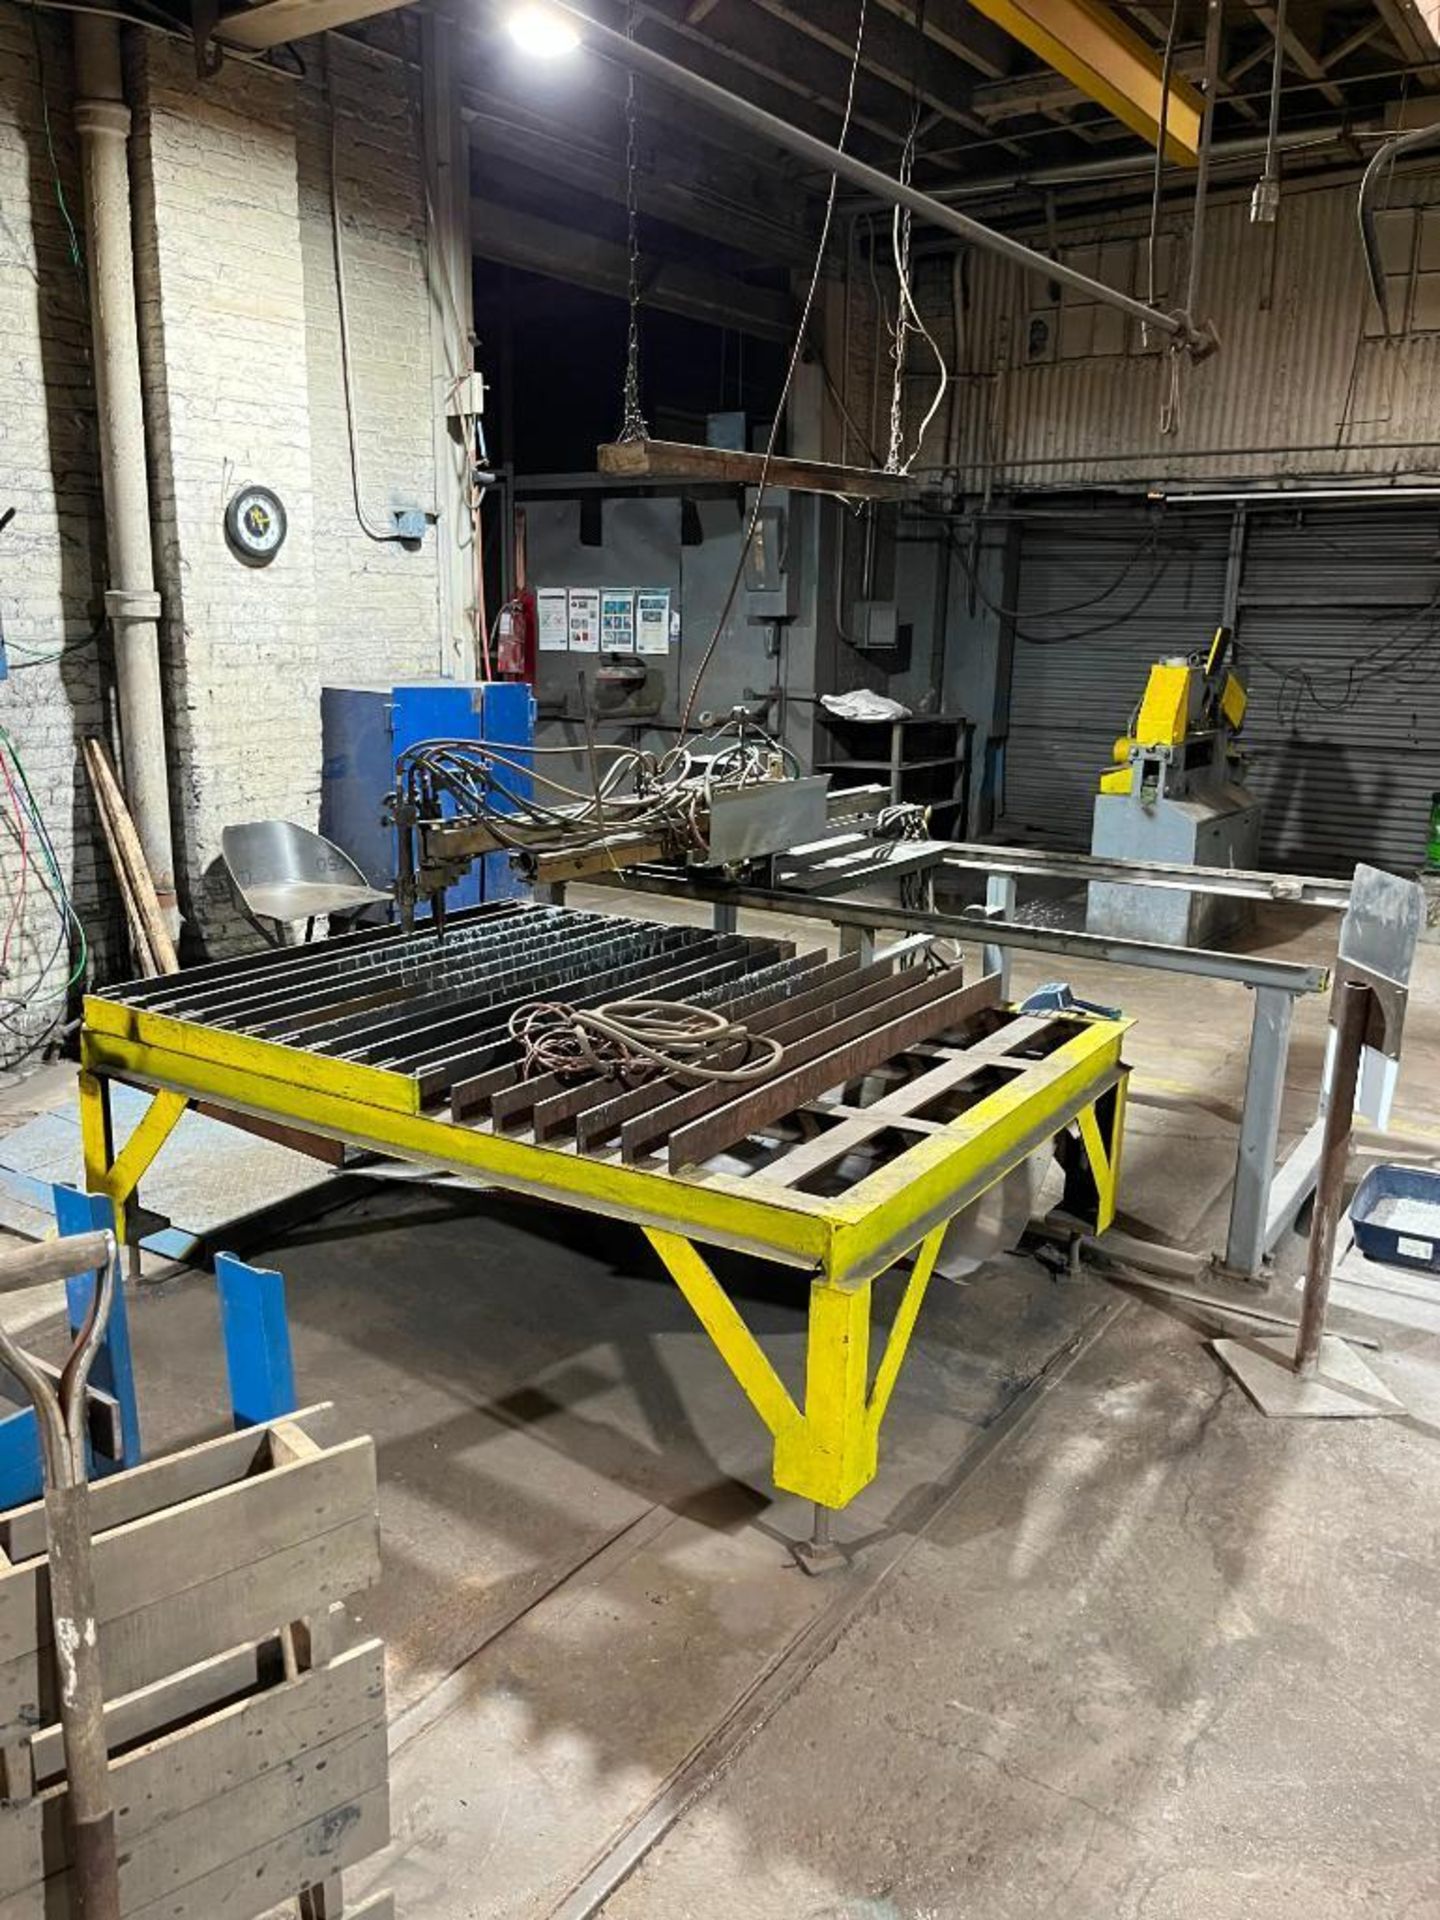 oxy acetylene cutting table, 82" x 60", Wesco tracer torch trolley, dual torch head - Image 5 of 8